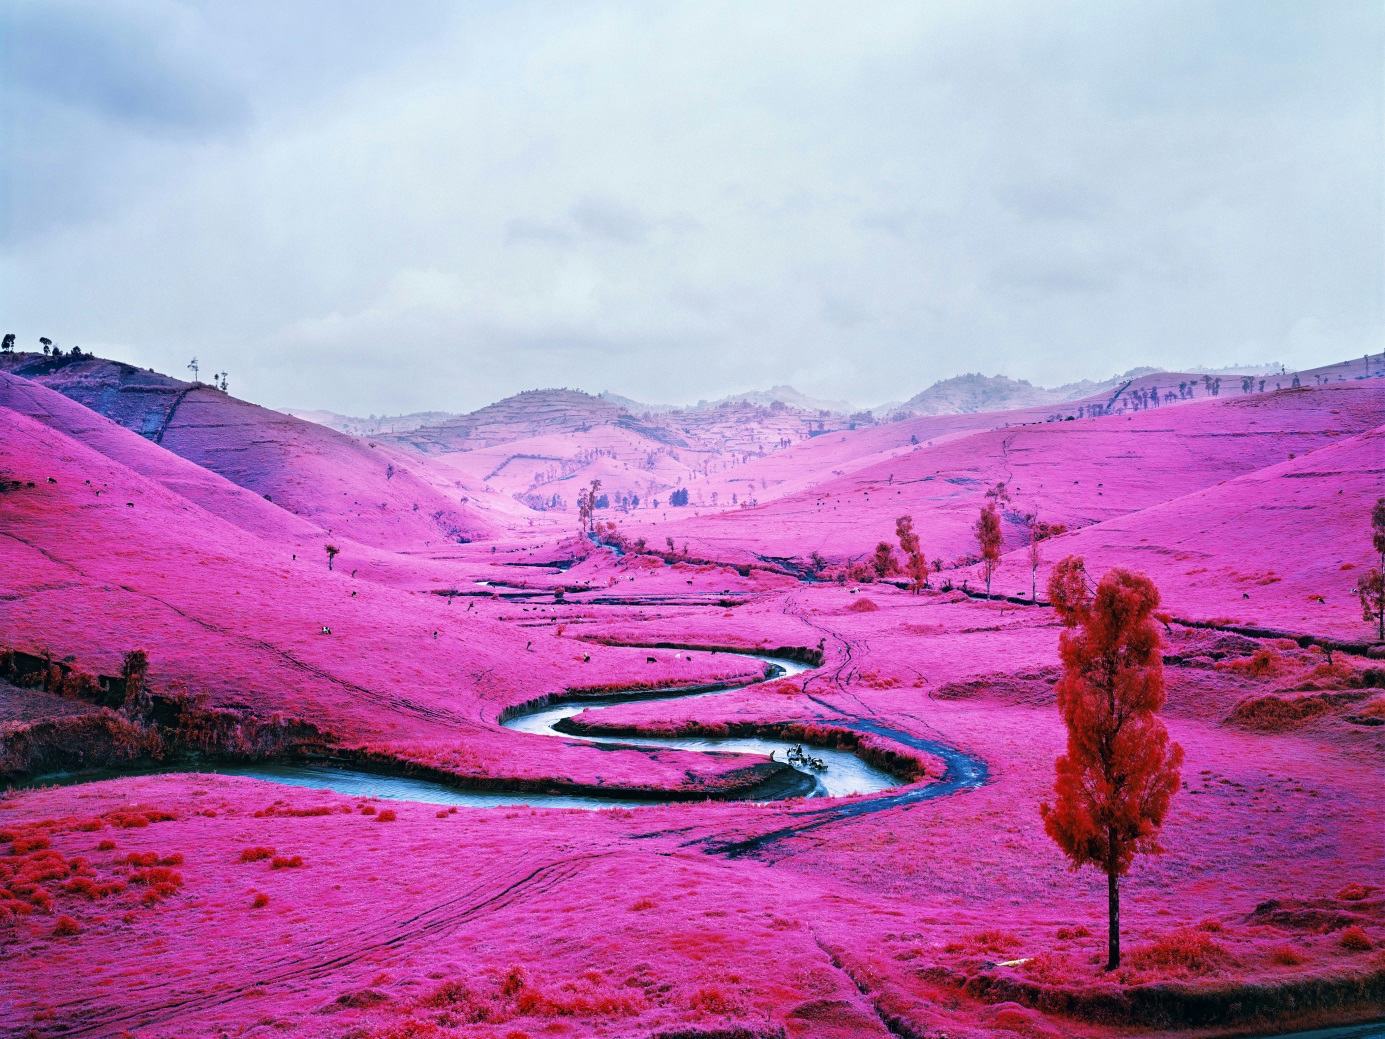 Platon, from the series Infra, 2010 © Richard Mosse, courtesy of the Foam Collection